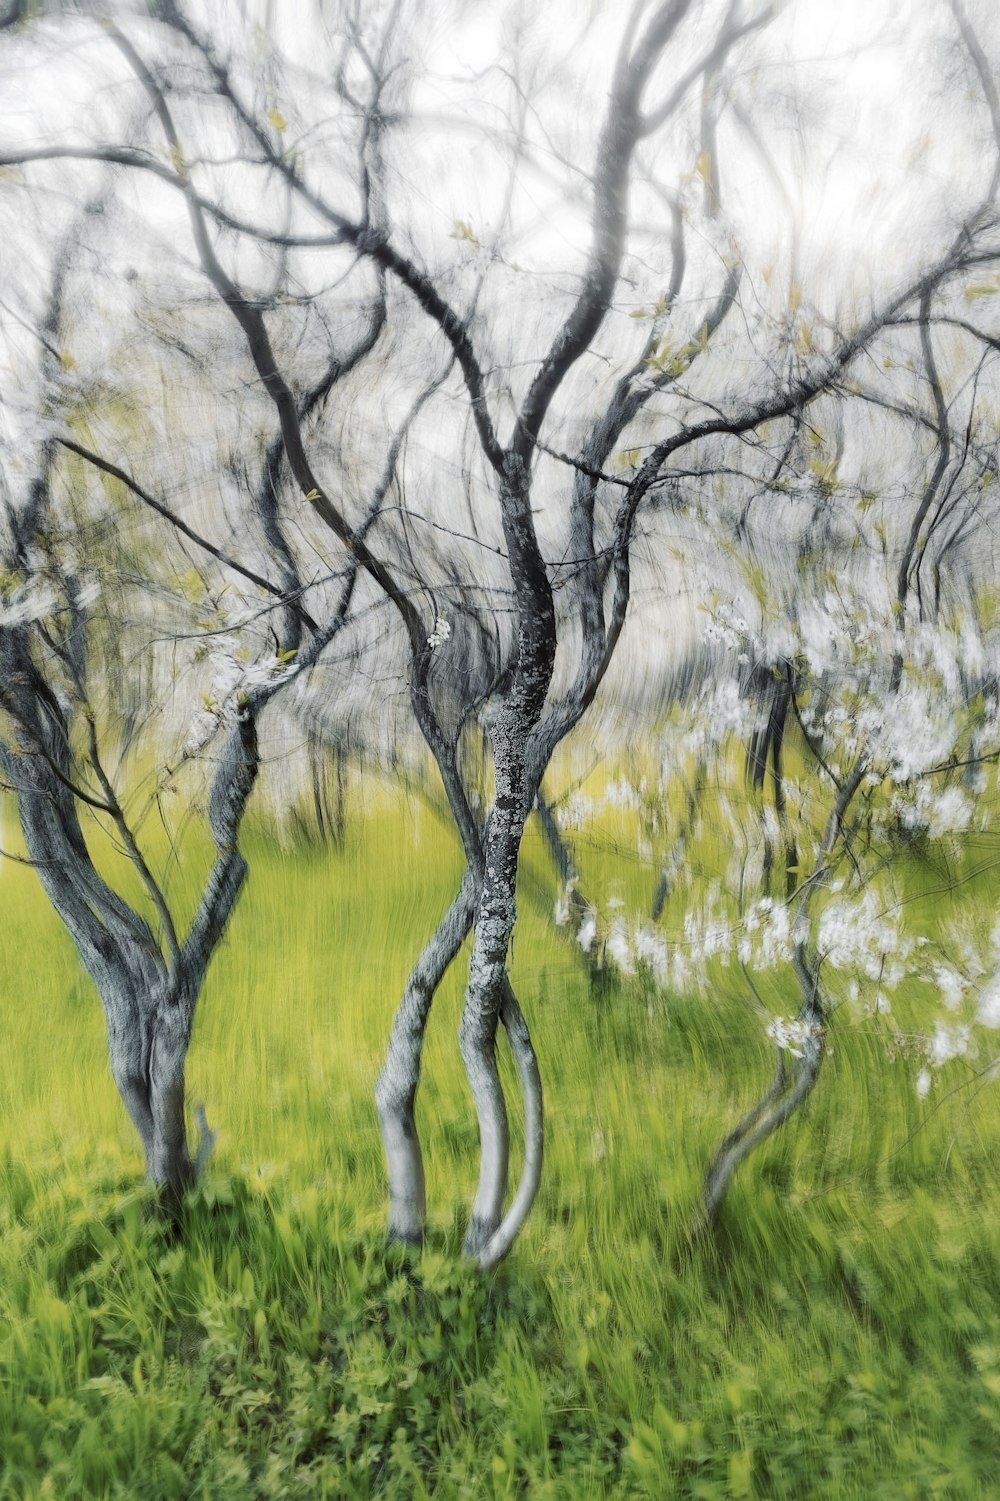 a painting of trees in a grassy field